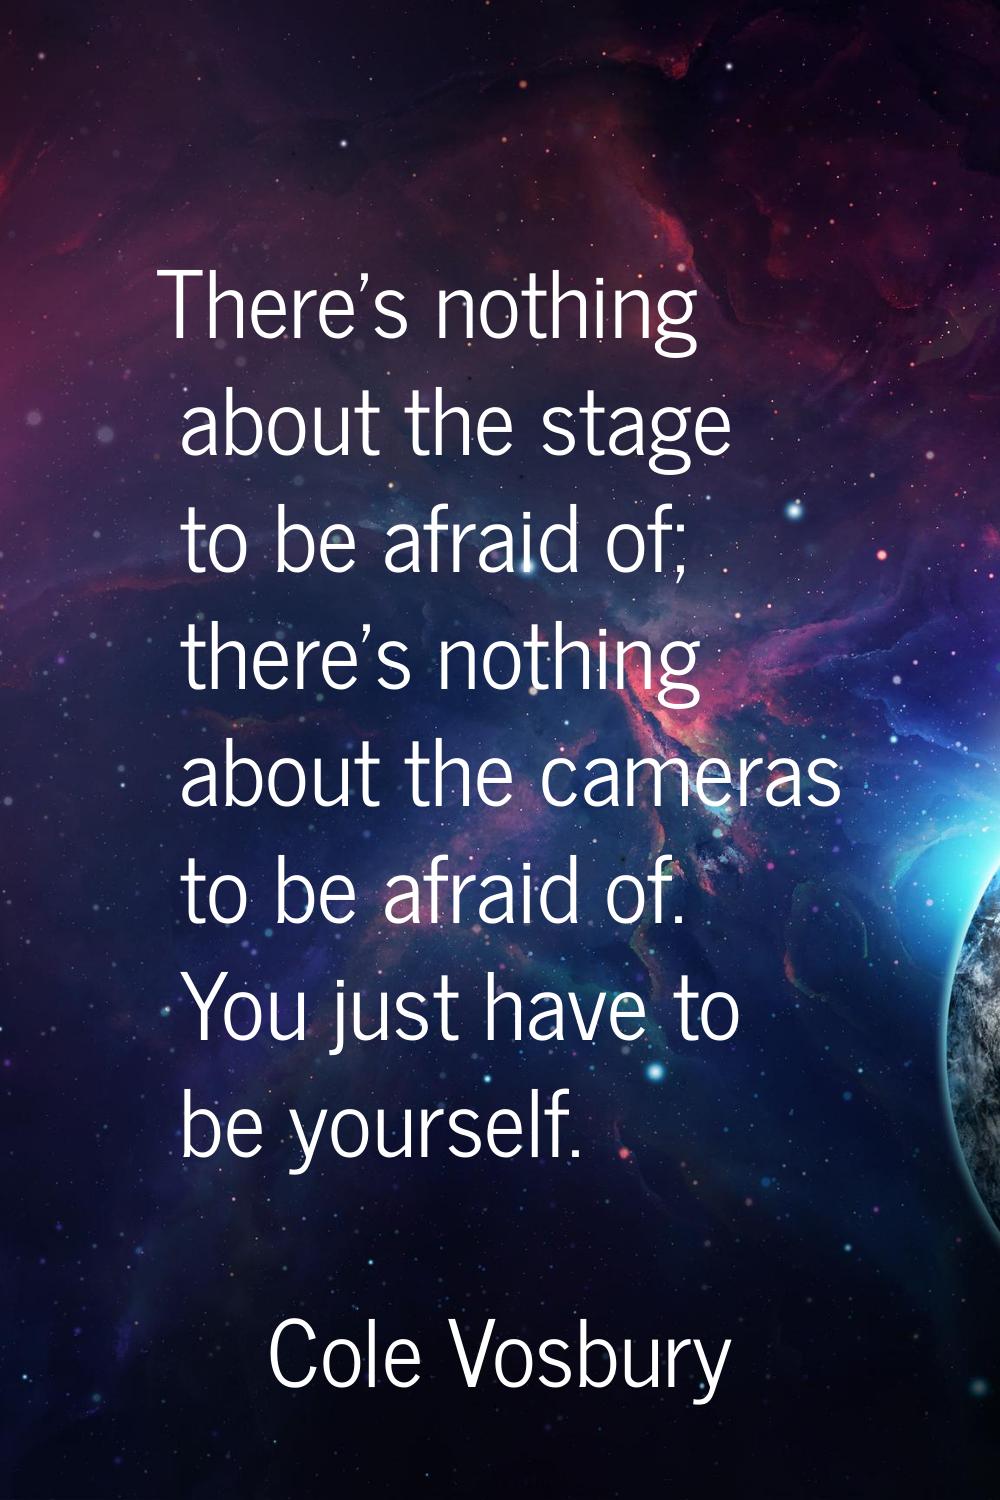 There's nothing about the stage to be afraid of; there's nothing about the cameras to be afraid of.